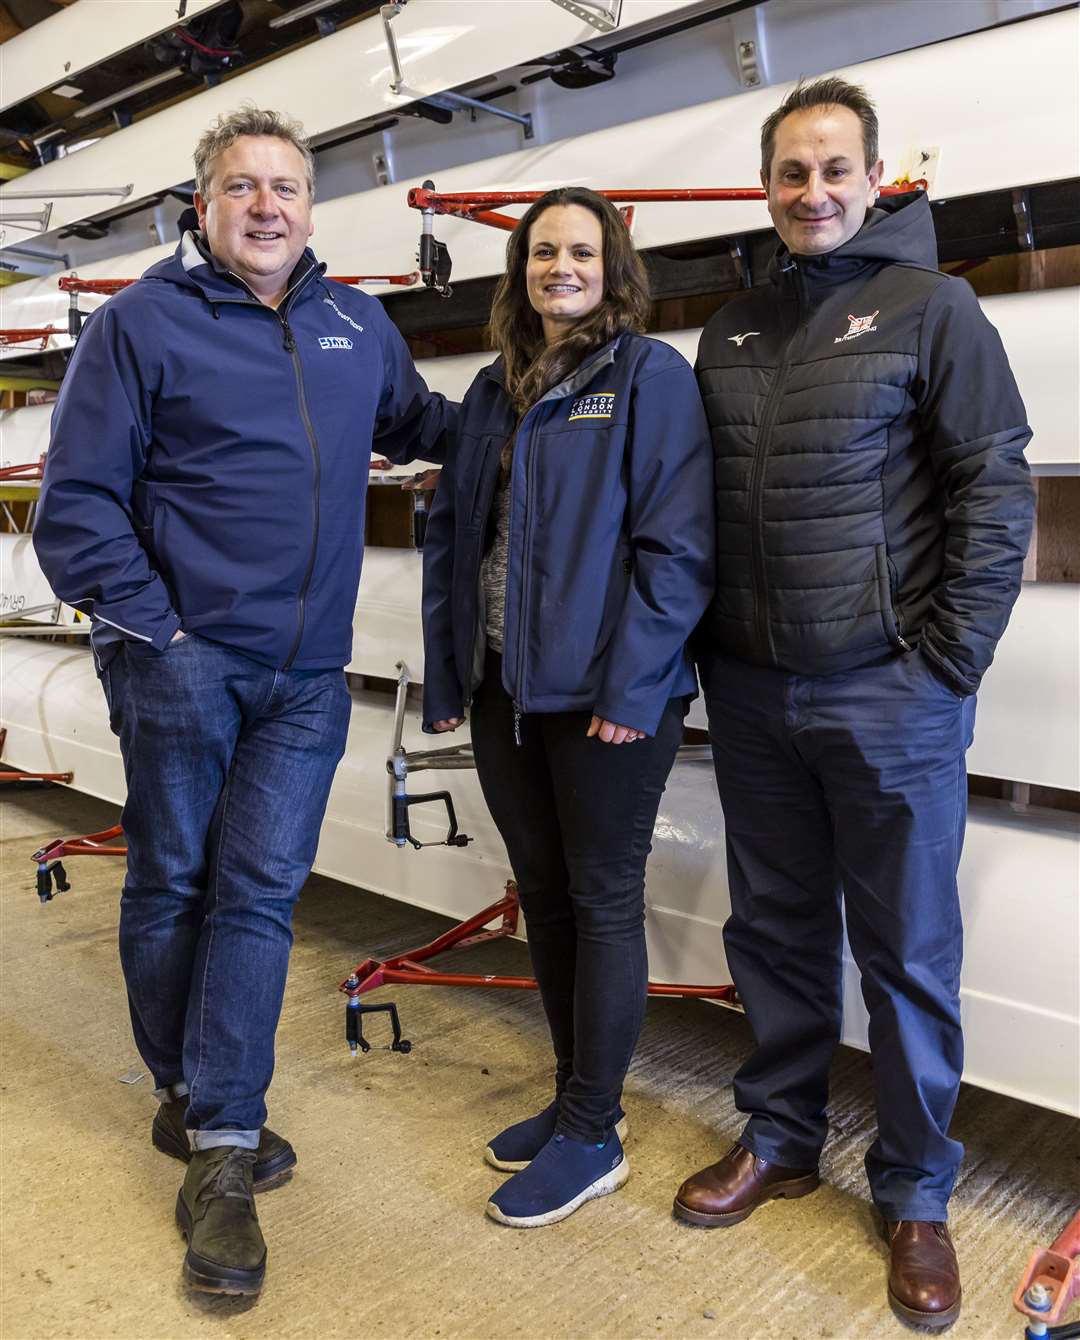 From left, Matt Rostron of London Youth Racing, Jenny Cooper from the Port of London Authority and Alastair Marks of British Rowing want to get more people on the water